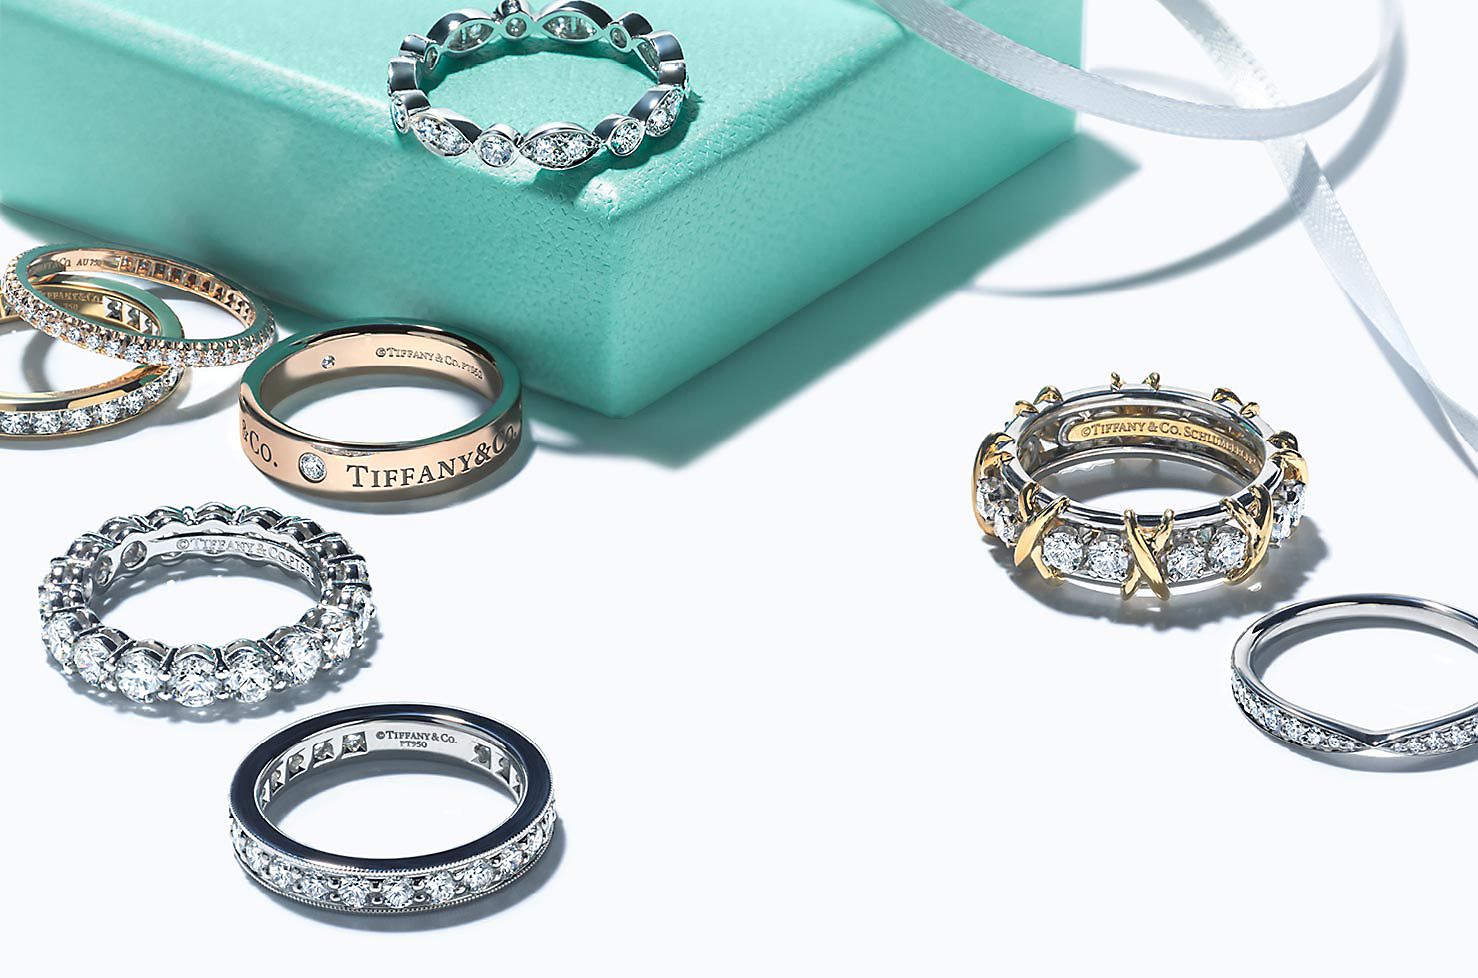  Wedding  Rings  and Wedding Bands  Tiffany  Co 